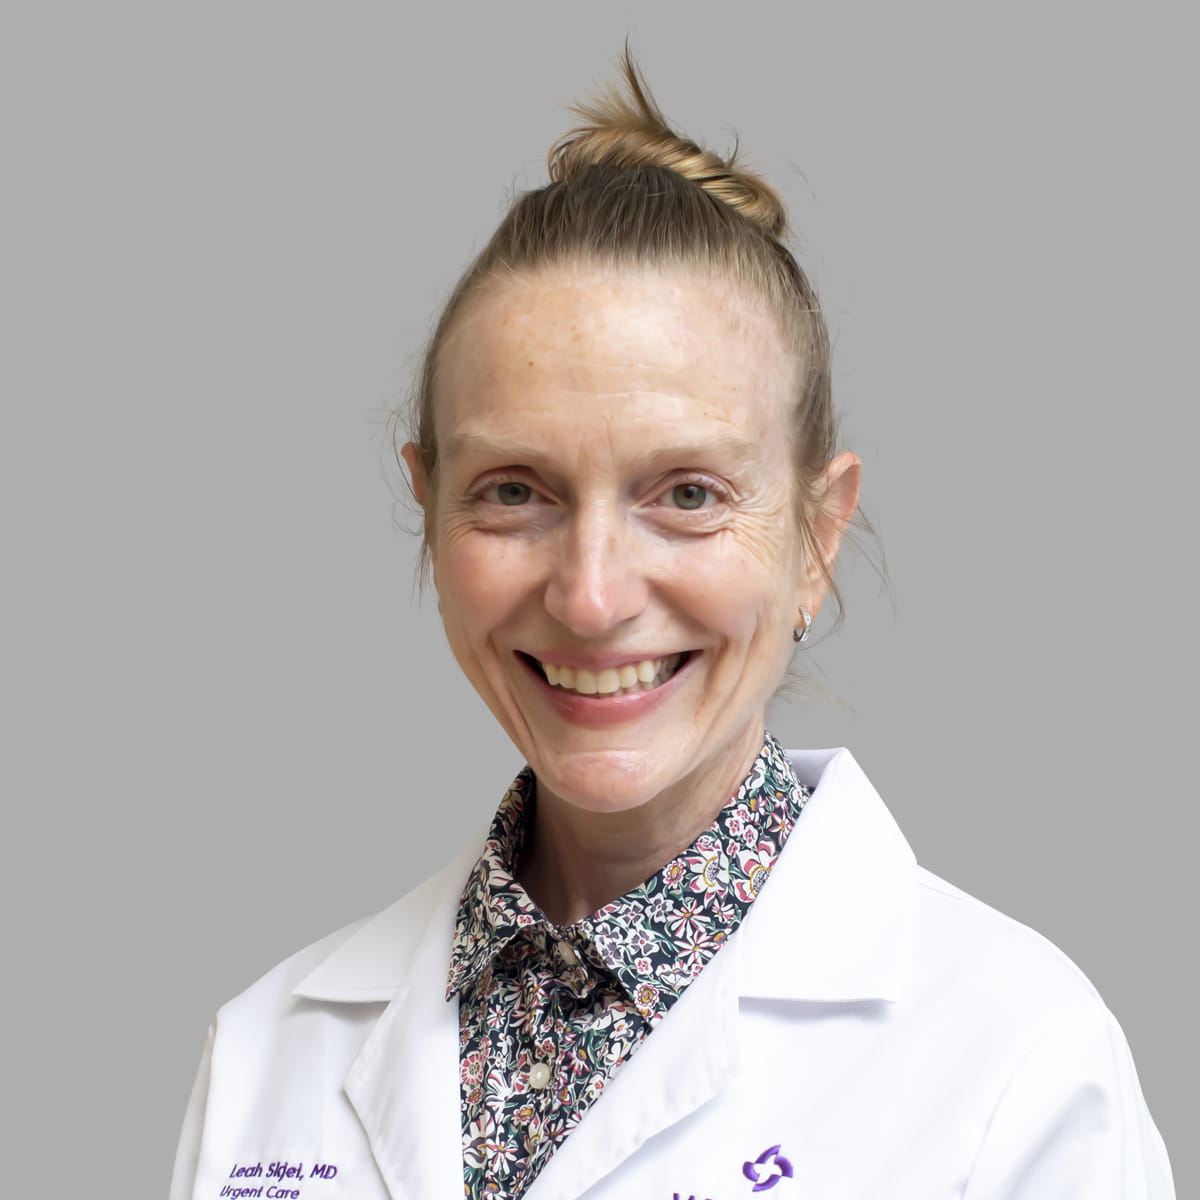 A friendly image of Leah Skjei, MD